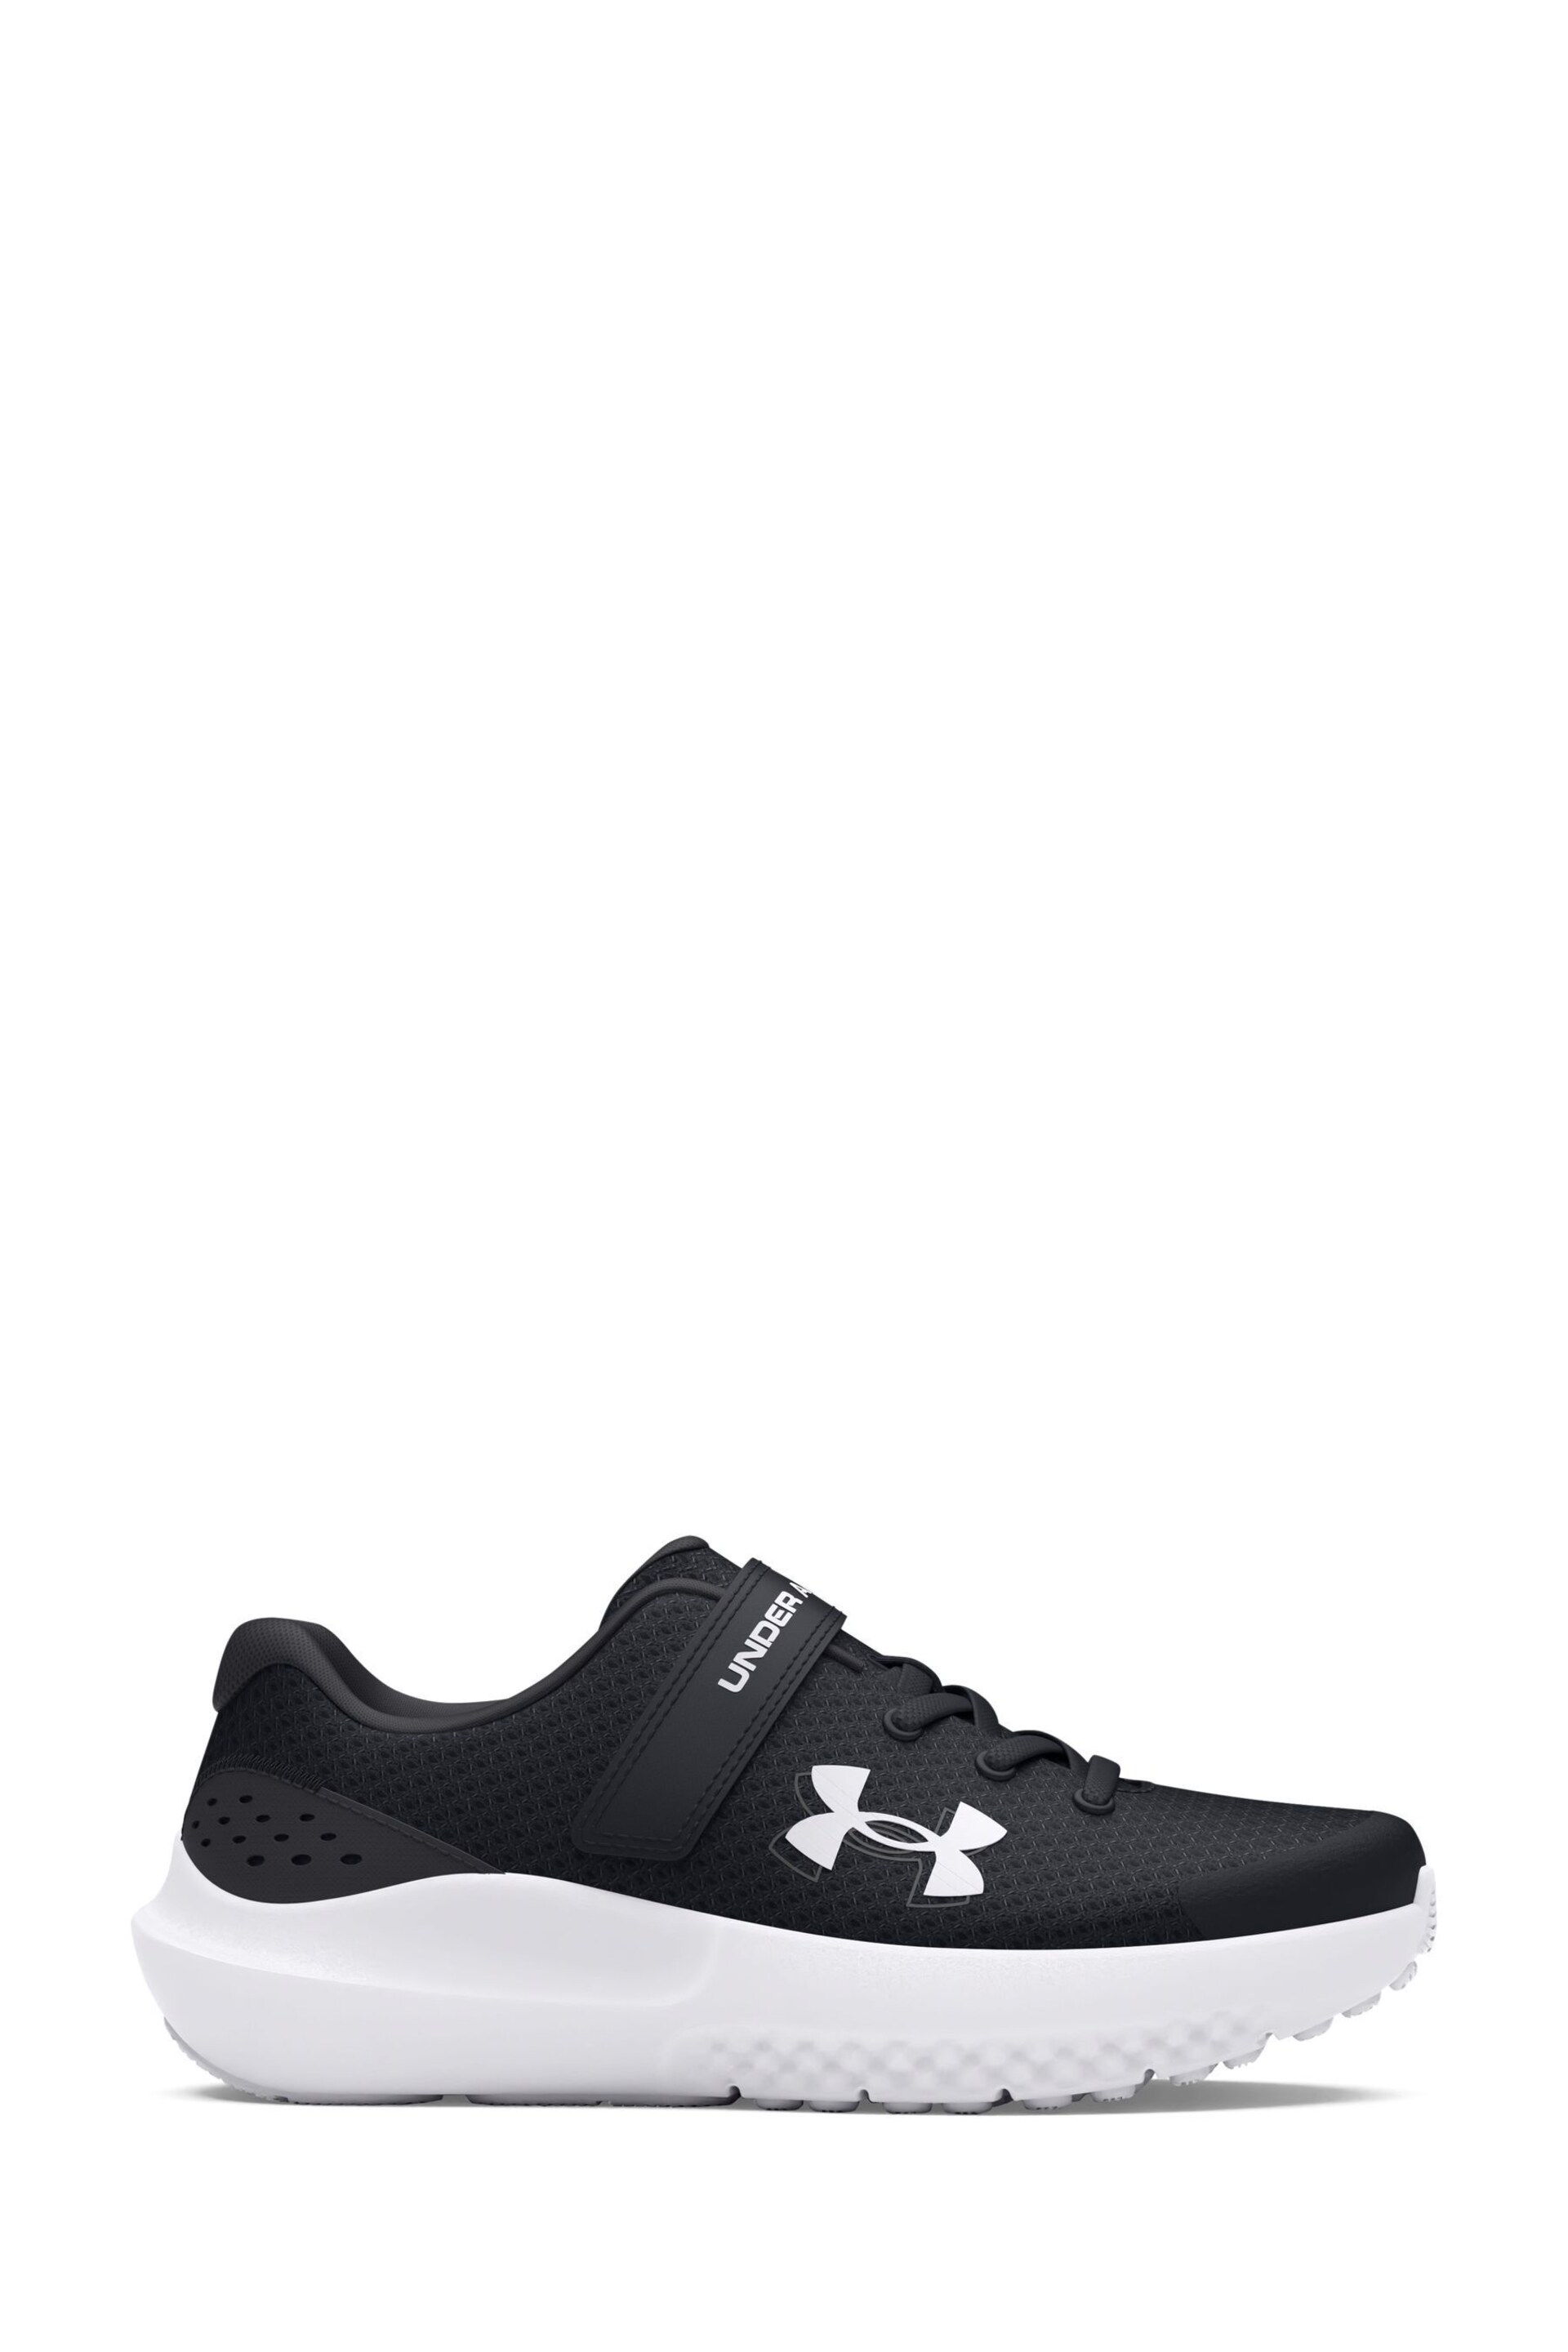 Under Armour Black/Grey Surge 4 Trainers - Image 1 of 6